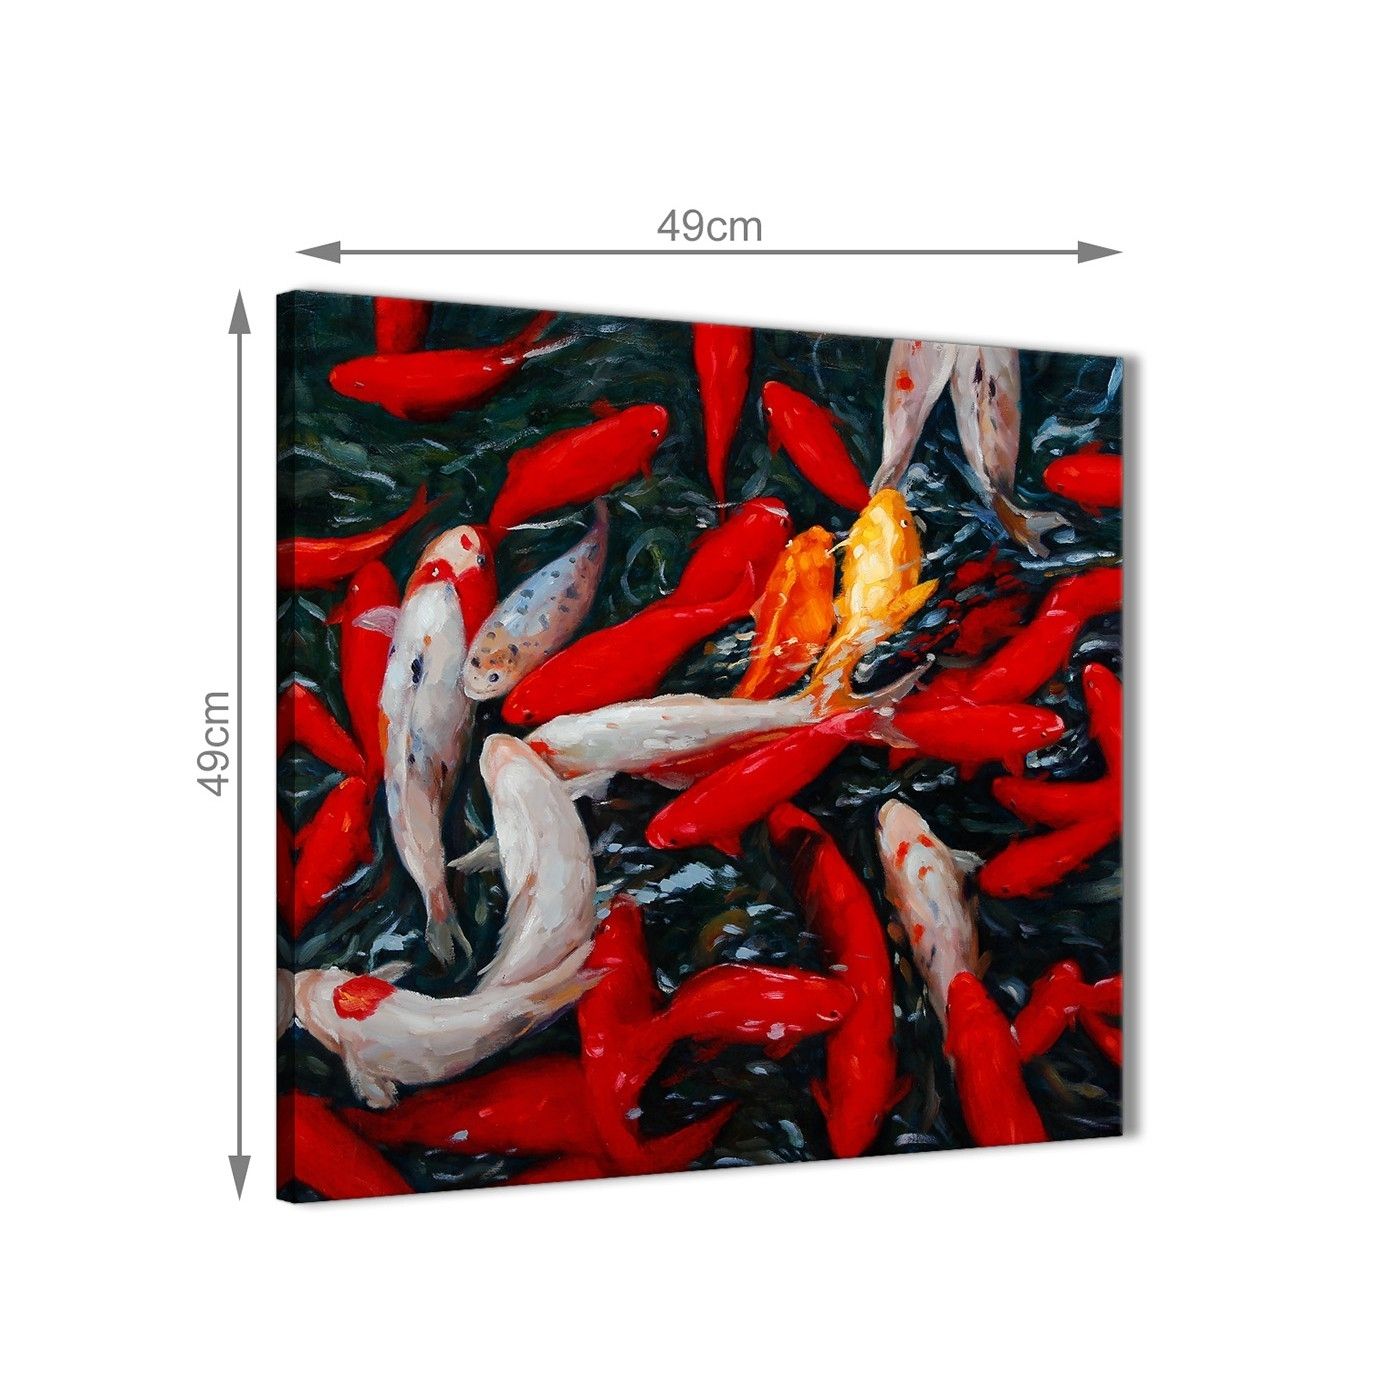 Canvas Pictures Koi Carp Fish Painting – 1s439s Red Orange – 49cm Within Most Recently Released Fish Painting Wall Art (View 17 of 20)